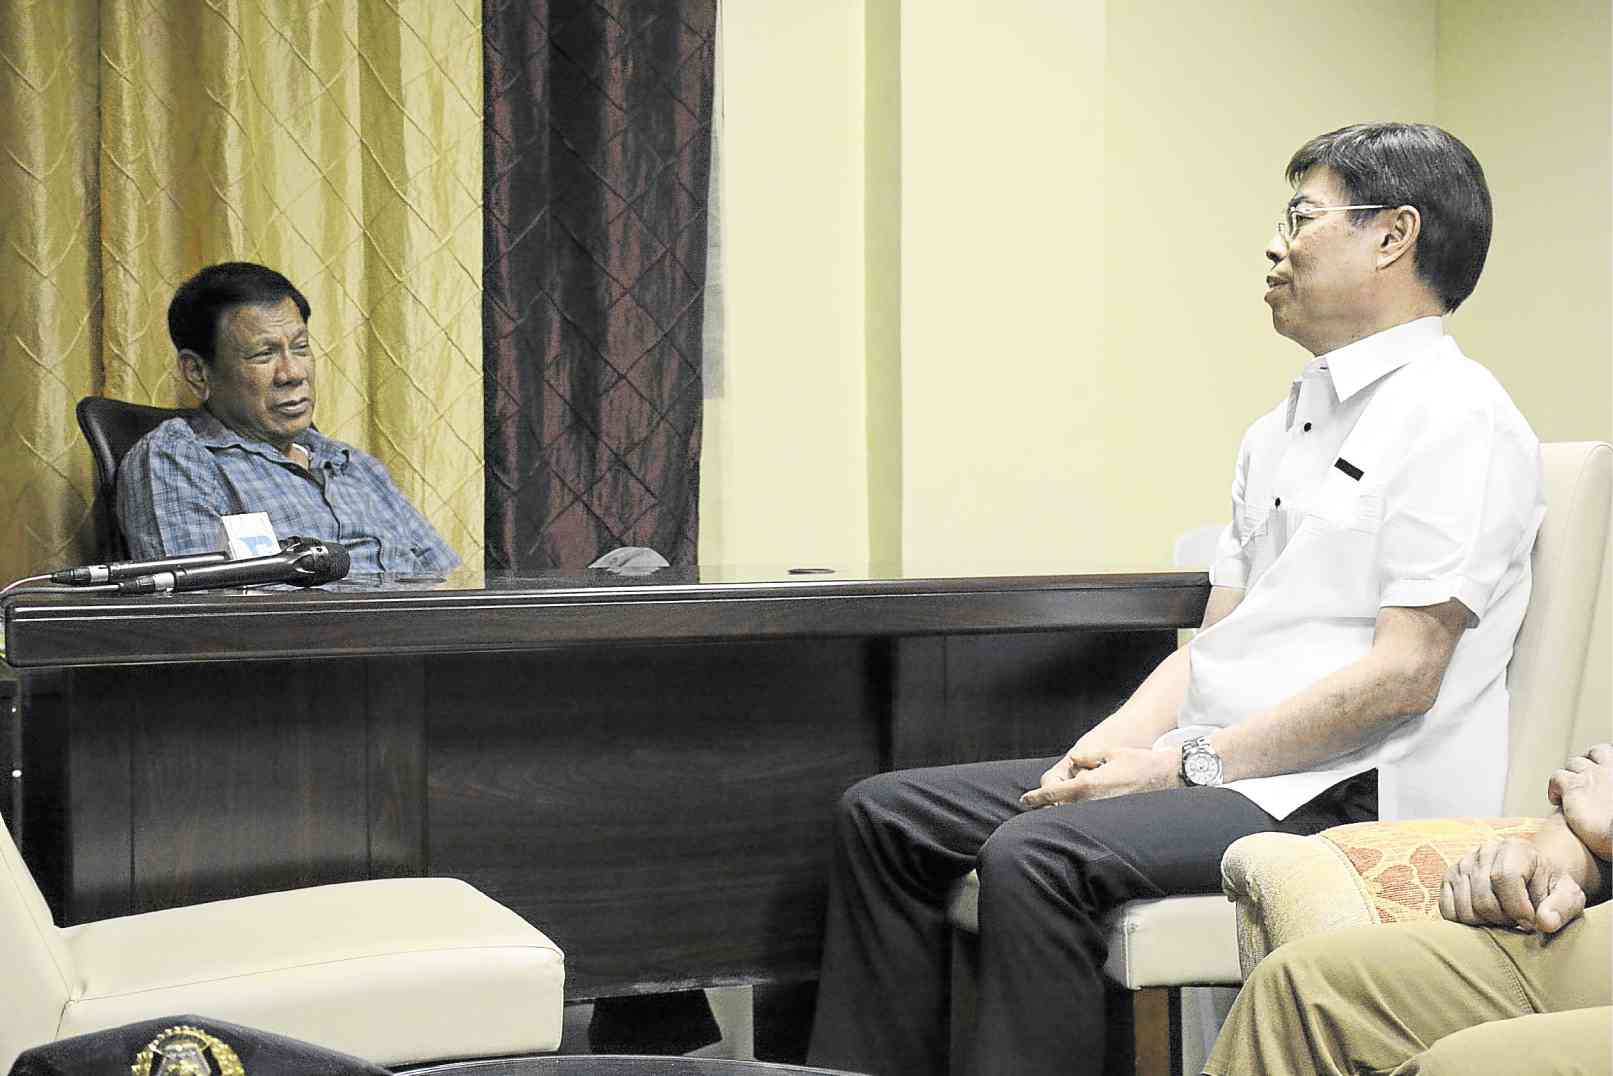 President Duterte warns Cebu businessman Peter Lim not to lie to him or he will have him killed. Lim sought the meeting with the President to deny that he was the drug lord wanted by the police. He was allowed to go, but told to face NBI investigation. (MALACAÑANG PHOTO)